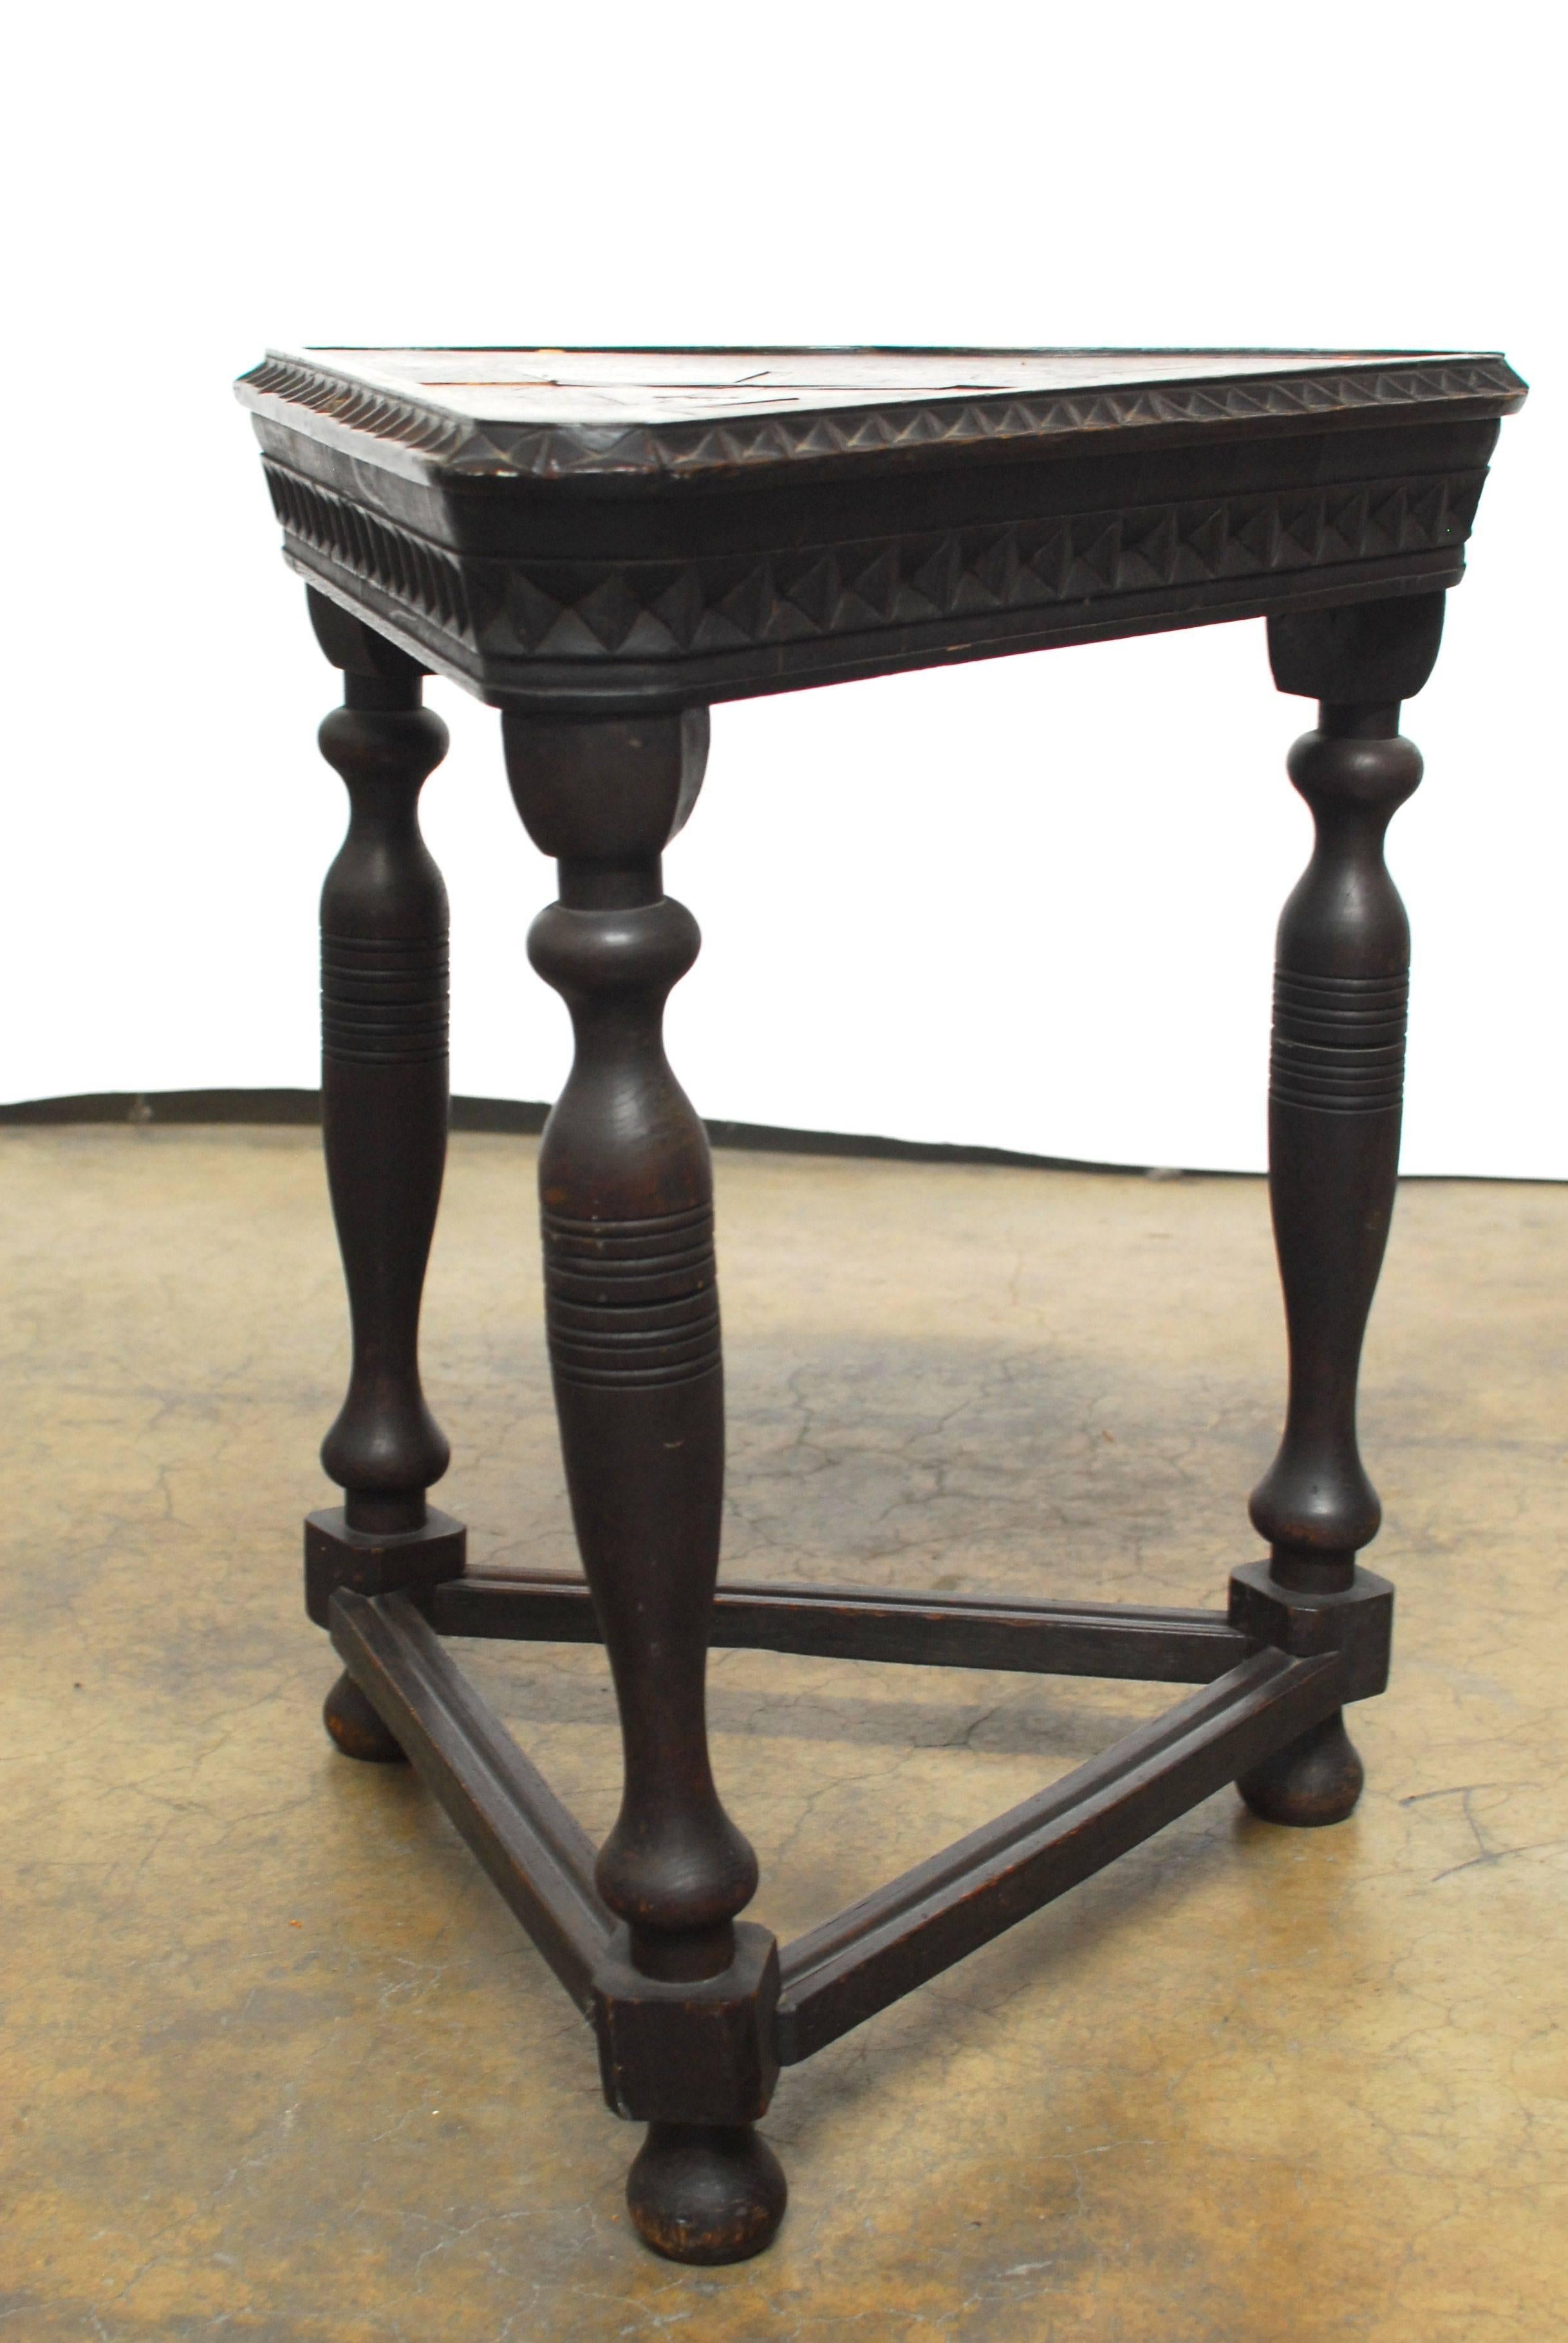 Unique carved triangular table with 3 turned legs and featuring a heart shaped top with geometric design carved apron, and a geometric inlay top with a cross motif. Square box stretchers with round feet. Carved oak has a ebonized finish.